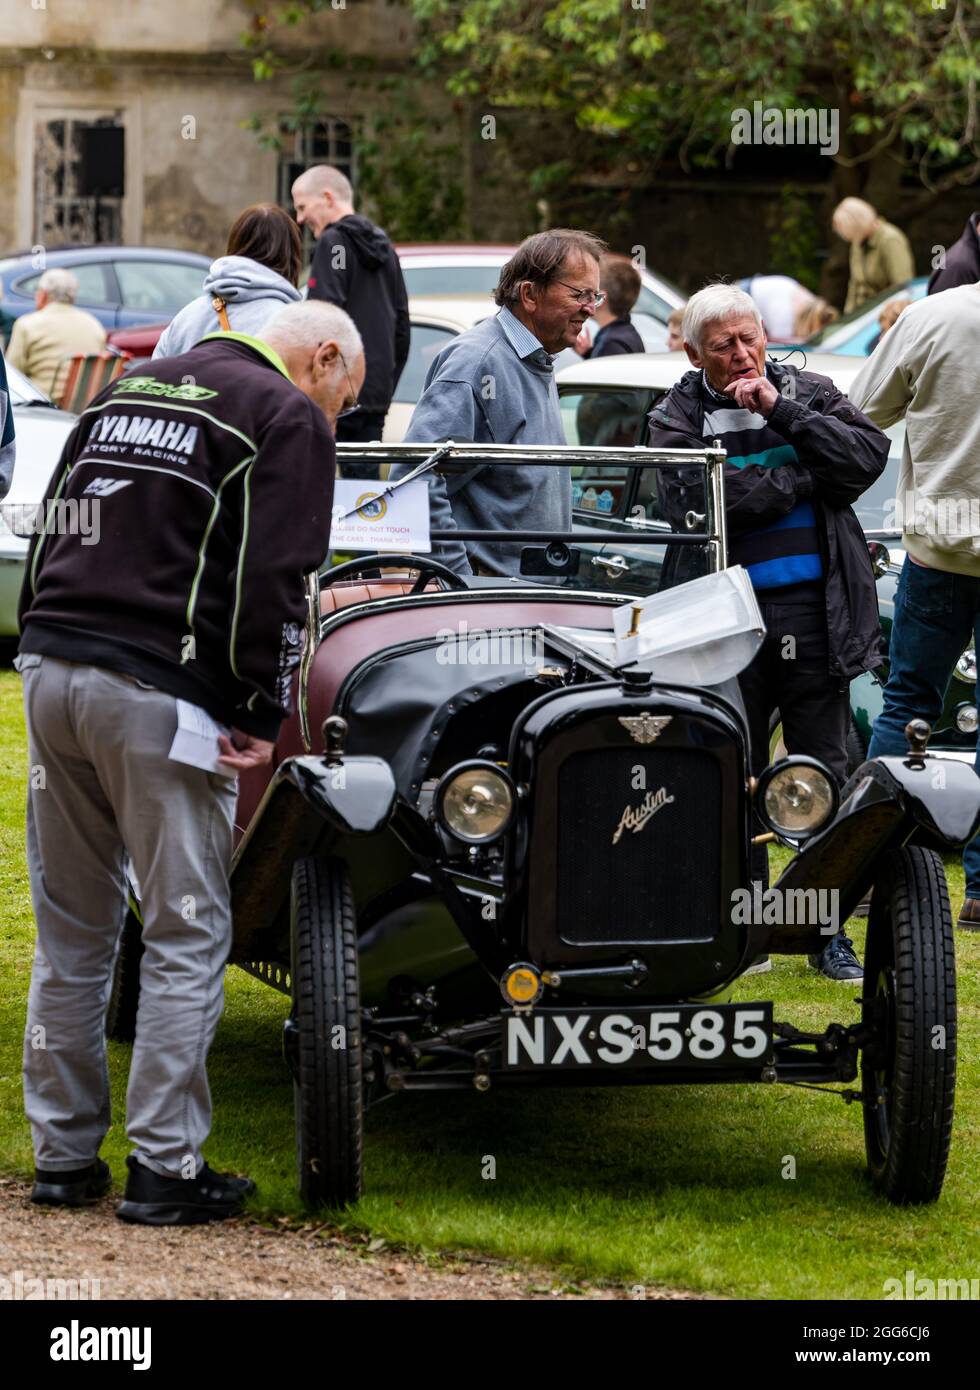 Newhailes, Musselburgh, East Lothian, Scotland, UK, 29th August 2021. Class car rally: an outdoor event takes place called Carhailes, with vintage cars, buses and motorbikes on display. Pictured: Enthusiasts discuss their cars with a 1933 Austin car Stock Photo